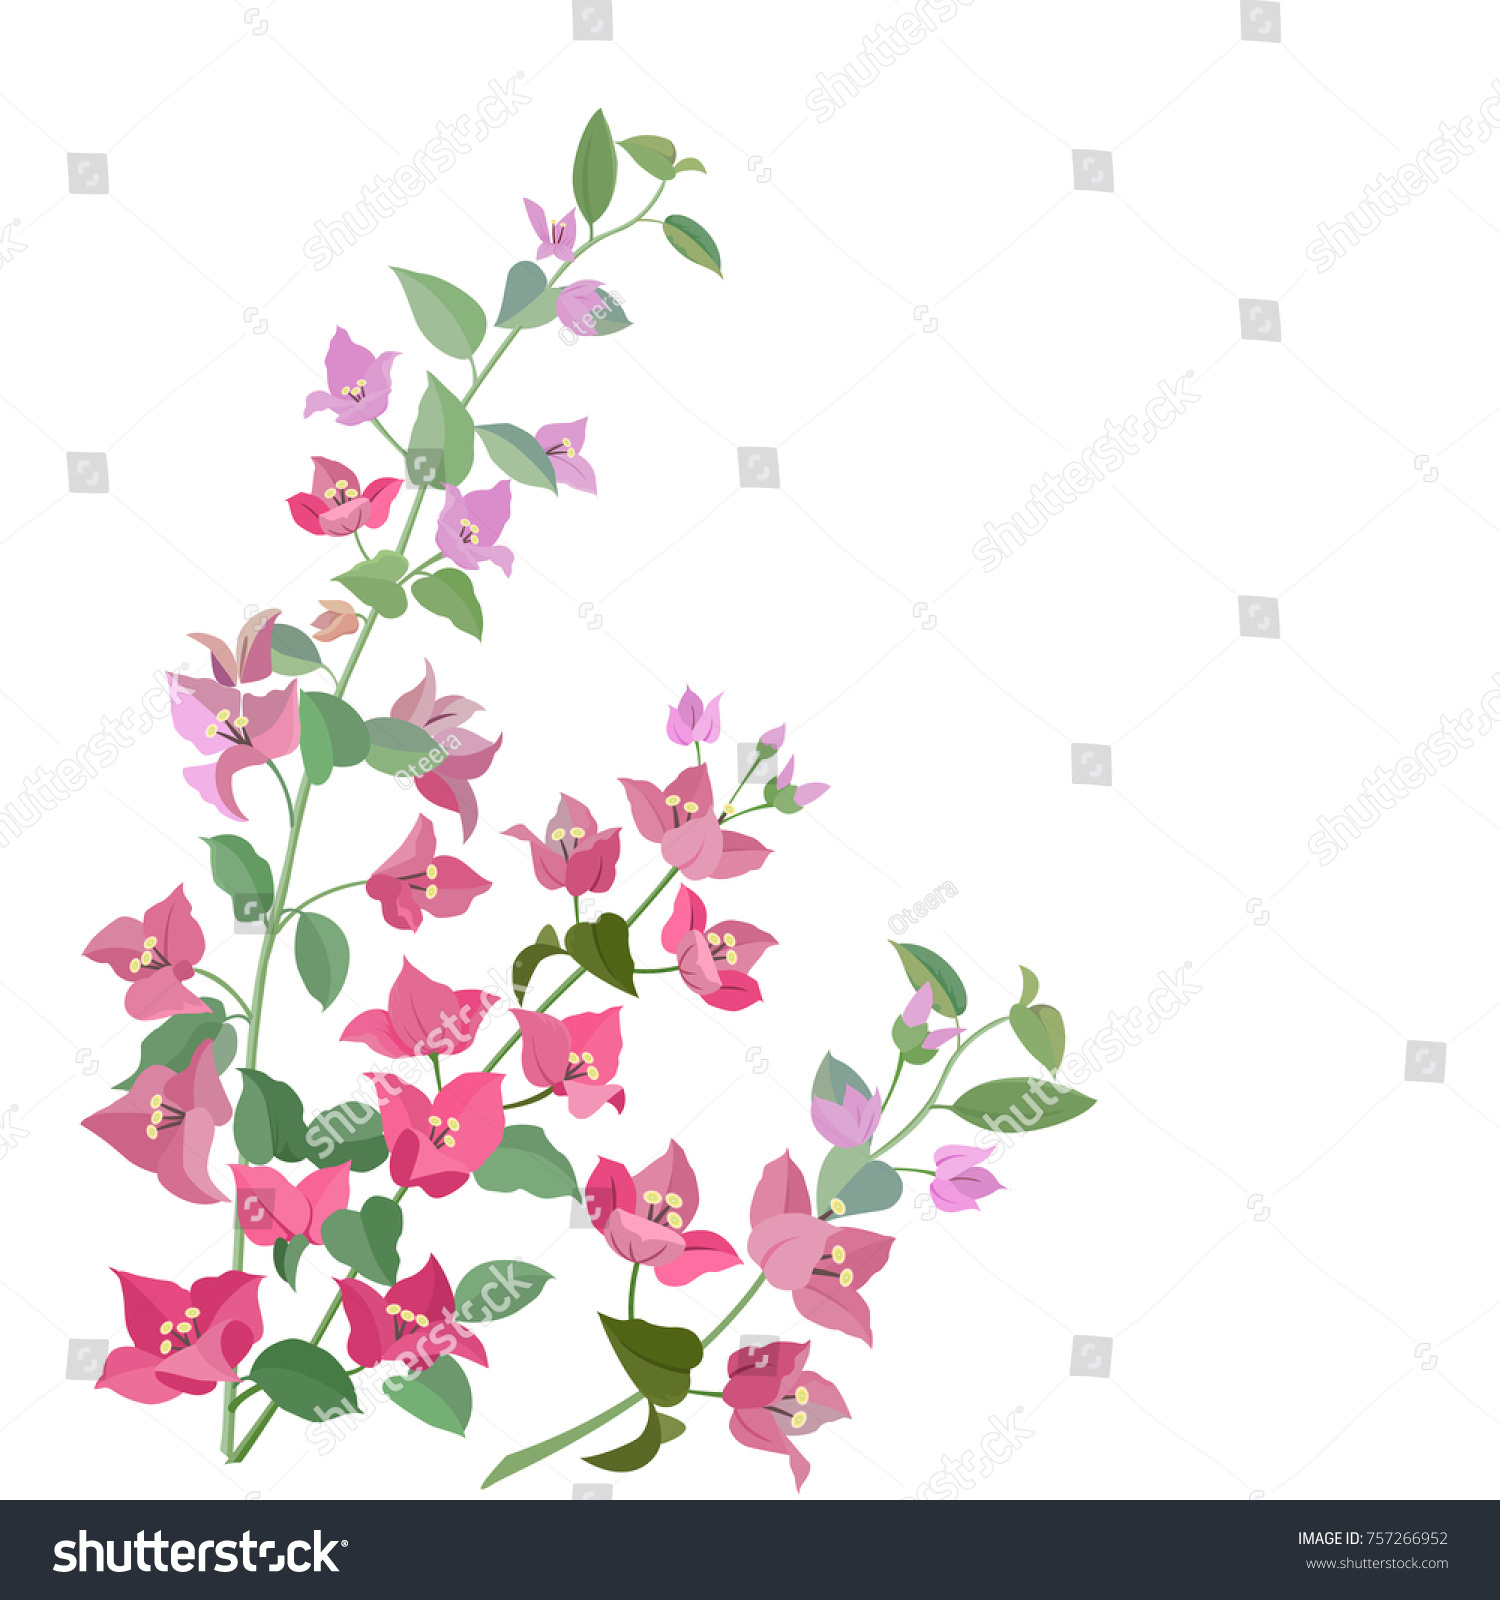 SVG of bougainvillea flowers isolate on white background. use for card svg